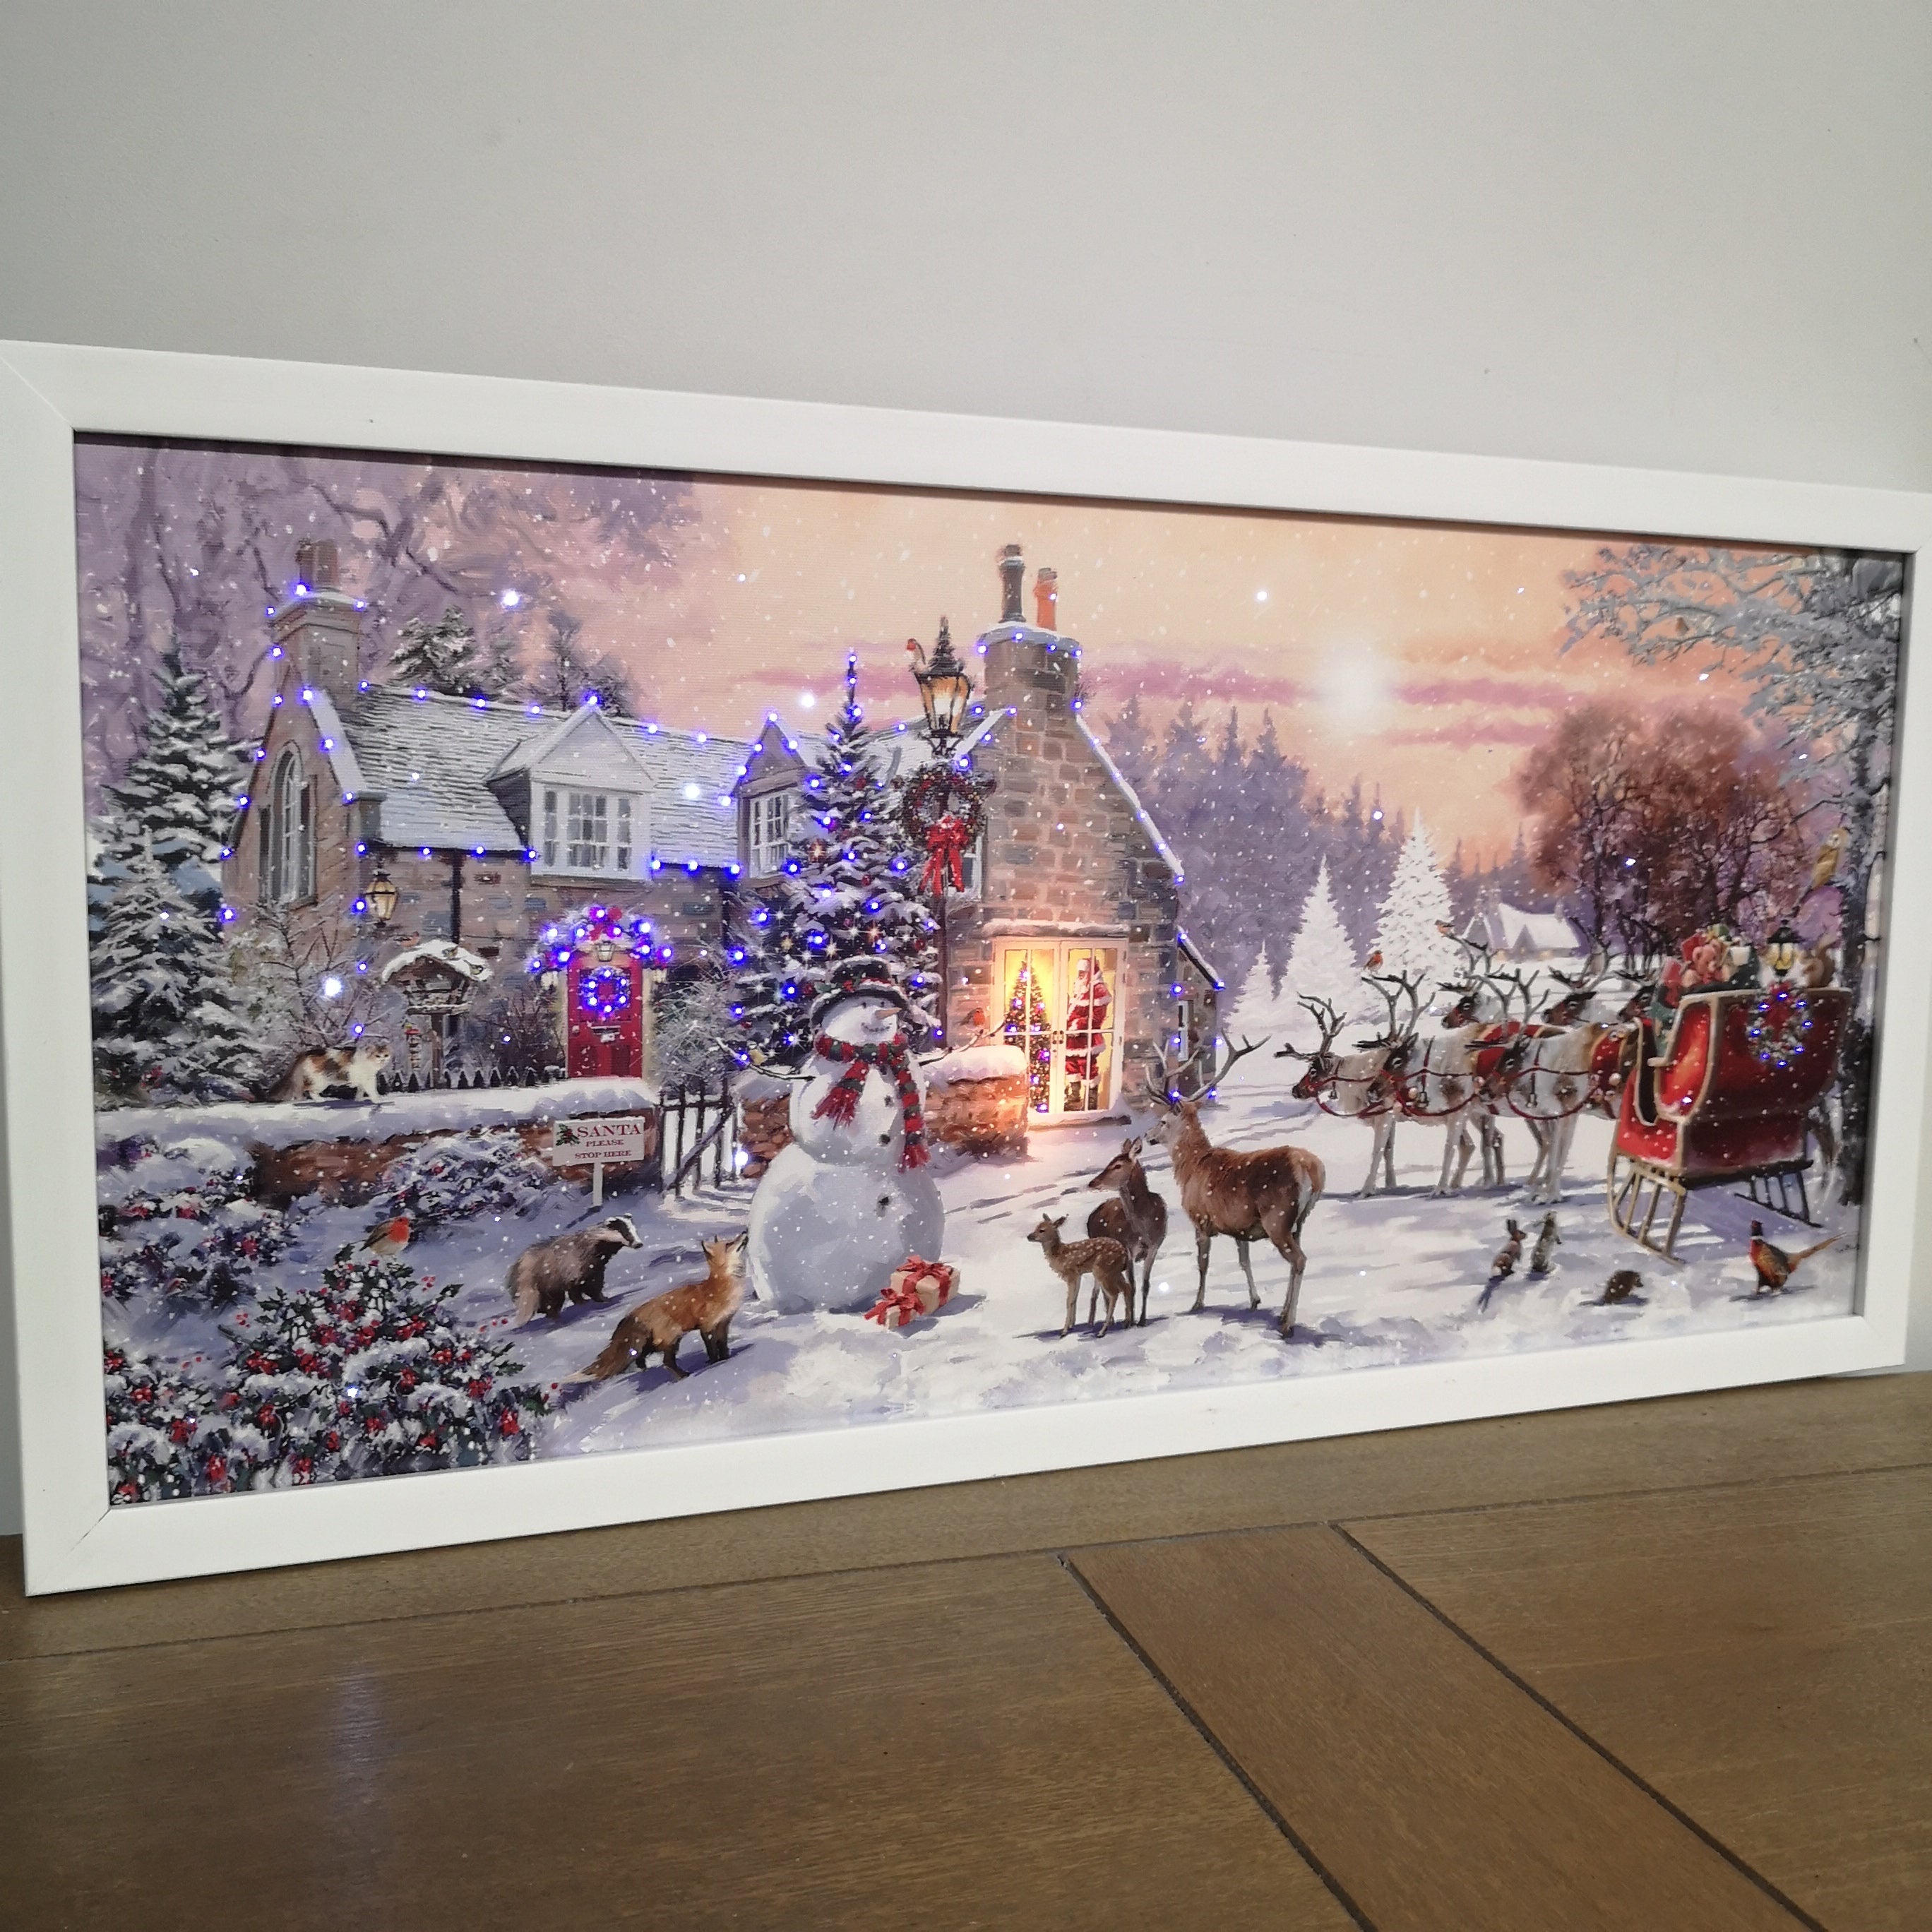 60 x 30cm Battery Operated Fibre Optic Touch Activated LED Christmas Wall Art with Santa Cottage Scene